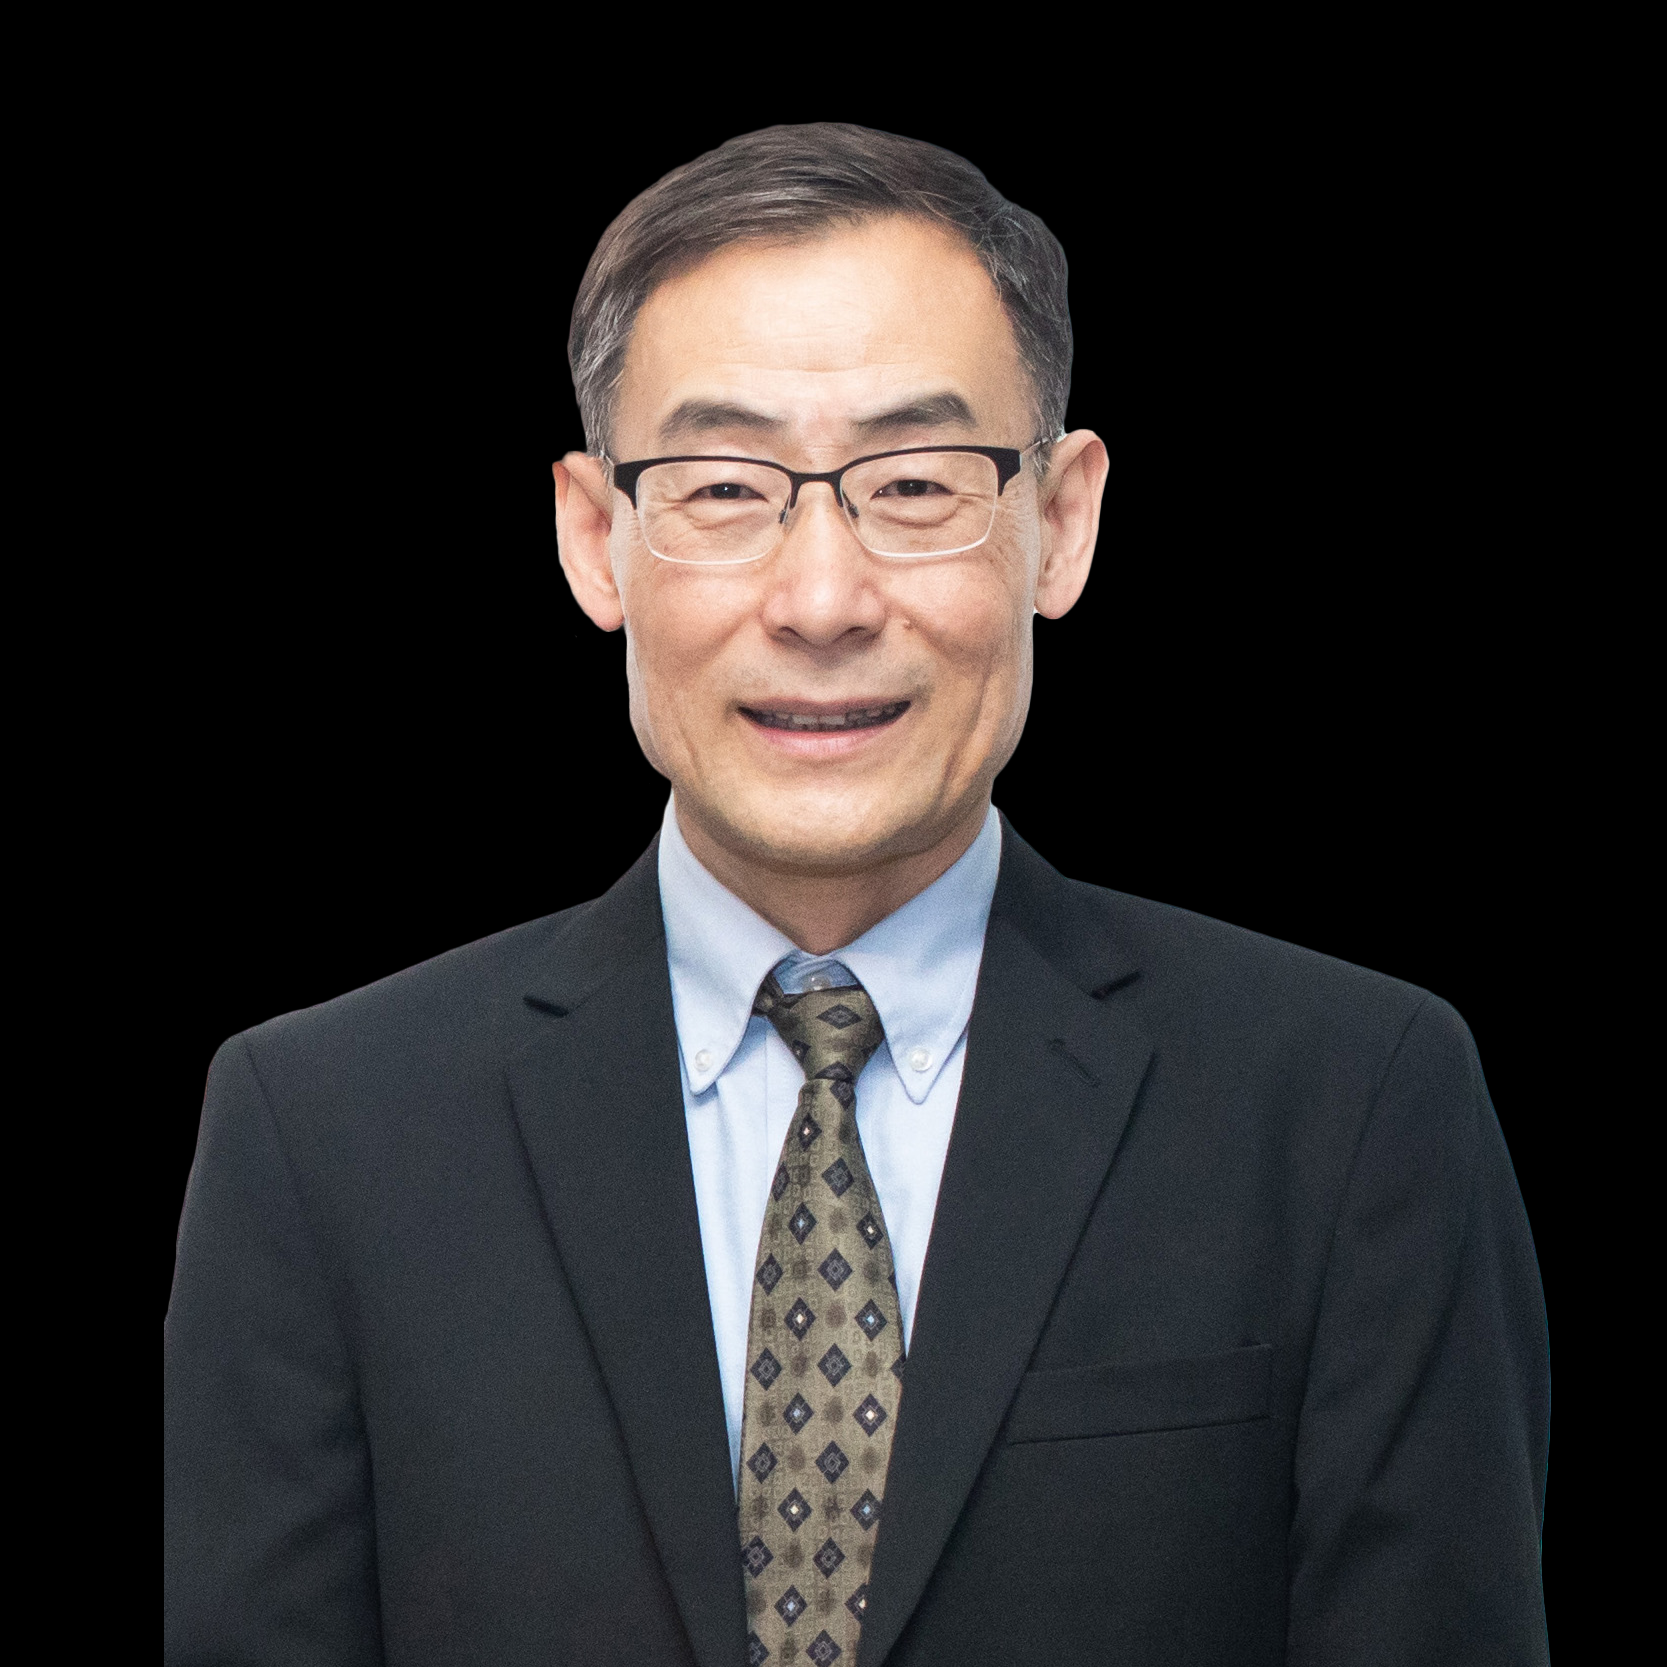 Dr. Lin Zhou - Senior Vice President and Chief Information Officer at The New School